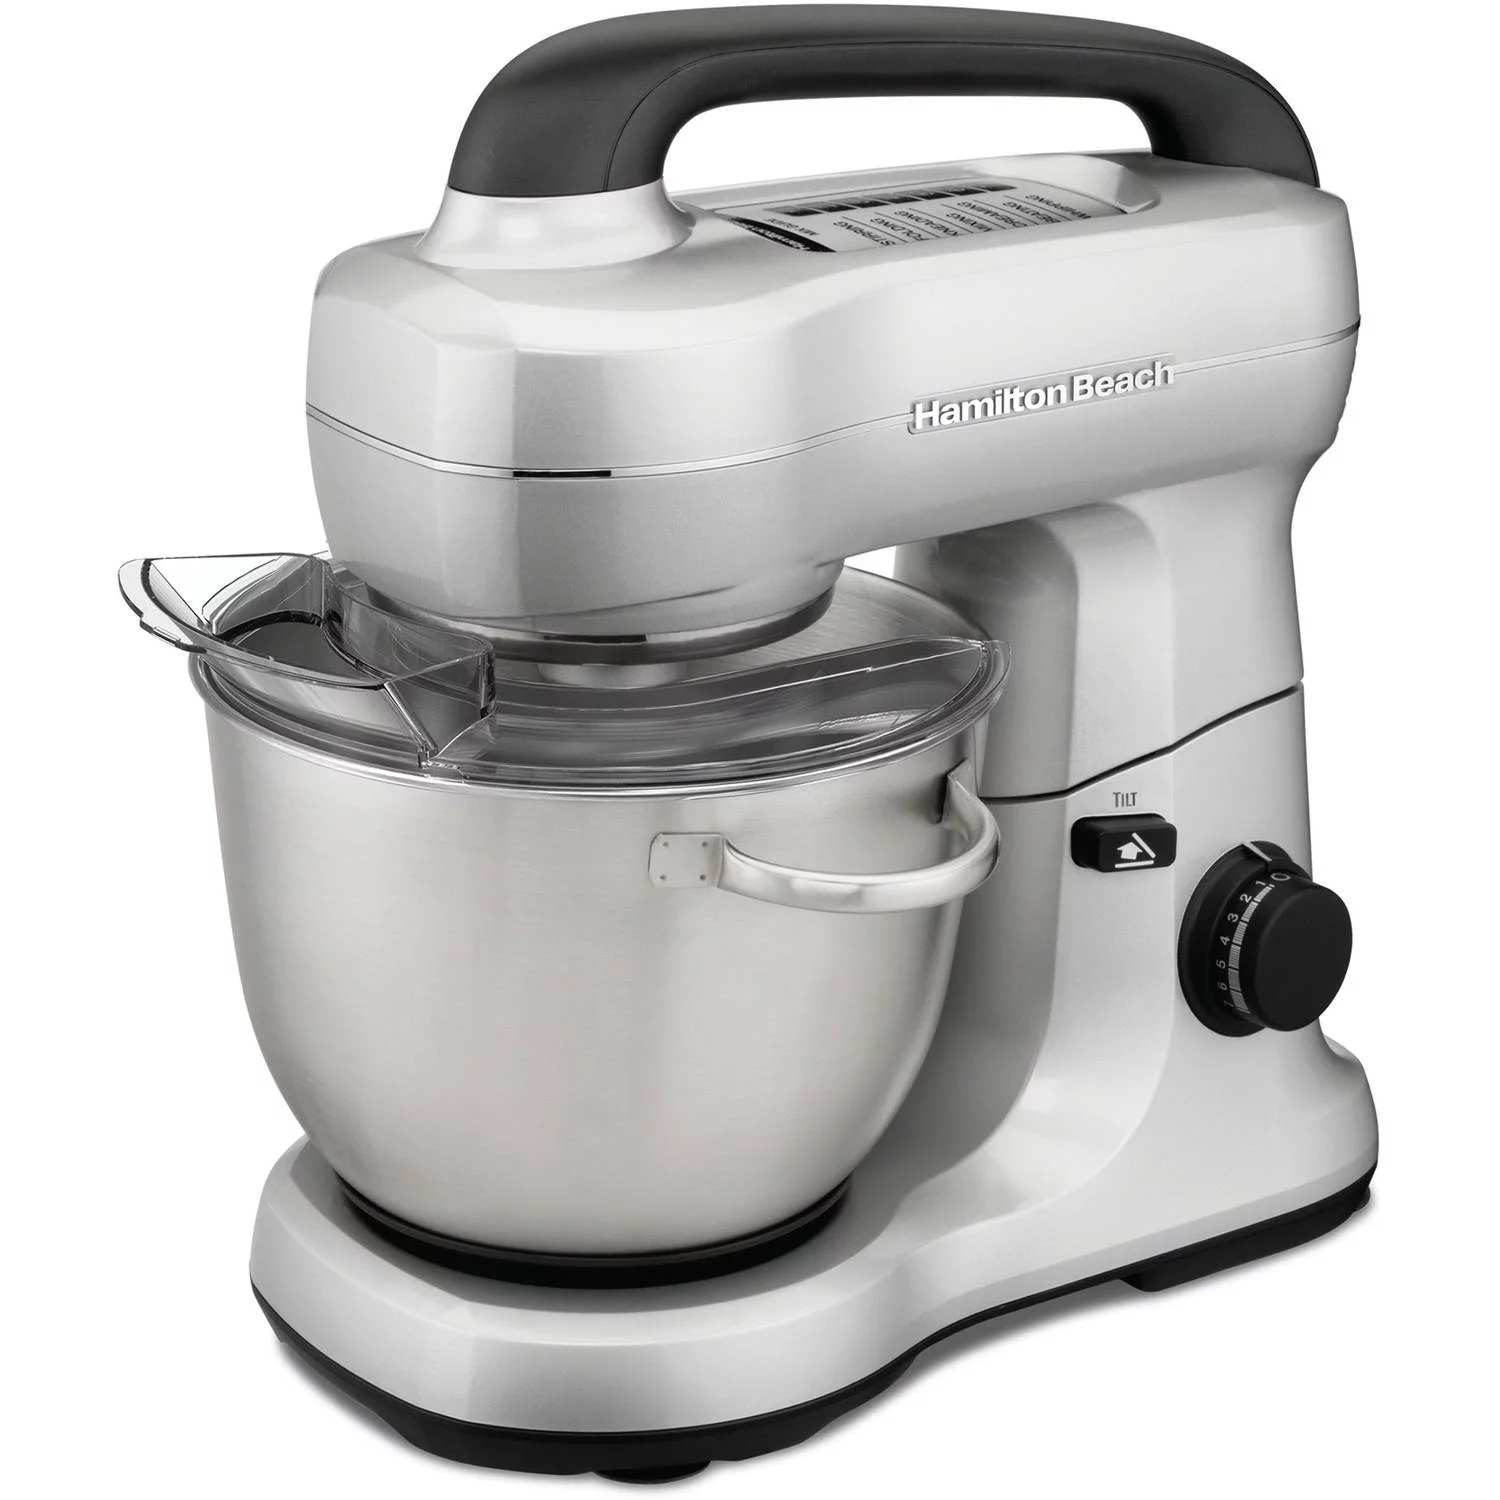 Hamilton Beach Electric Stand Mixer with 4 Quart Stainless Bowl, 7 Speeds, Whisk, Dough Hook, and Flat Beater Attachments, Splash Guard, 300 Watts, Silver, 63392